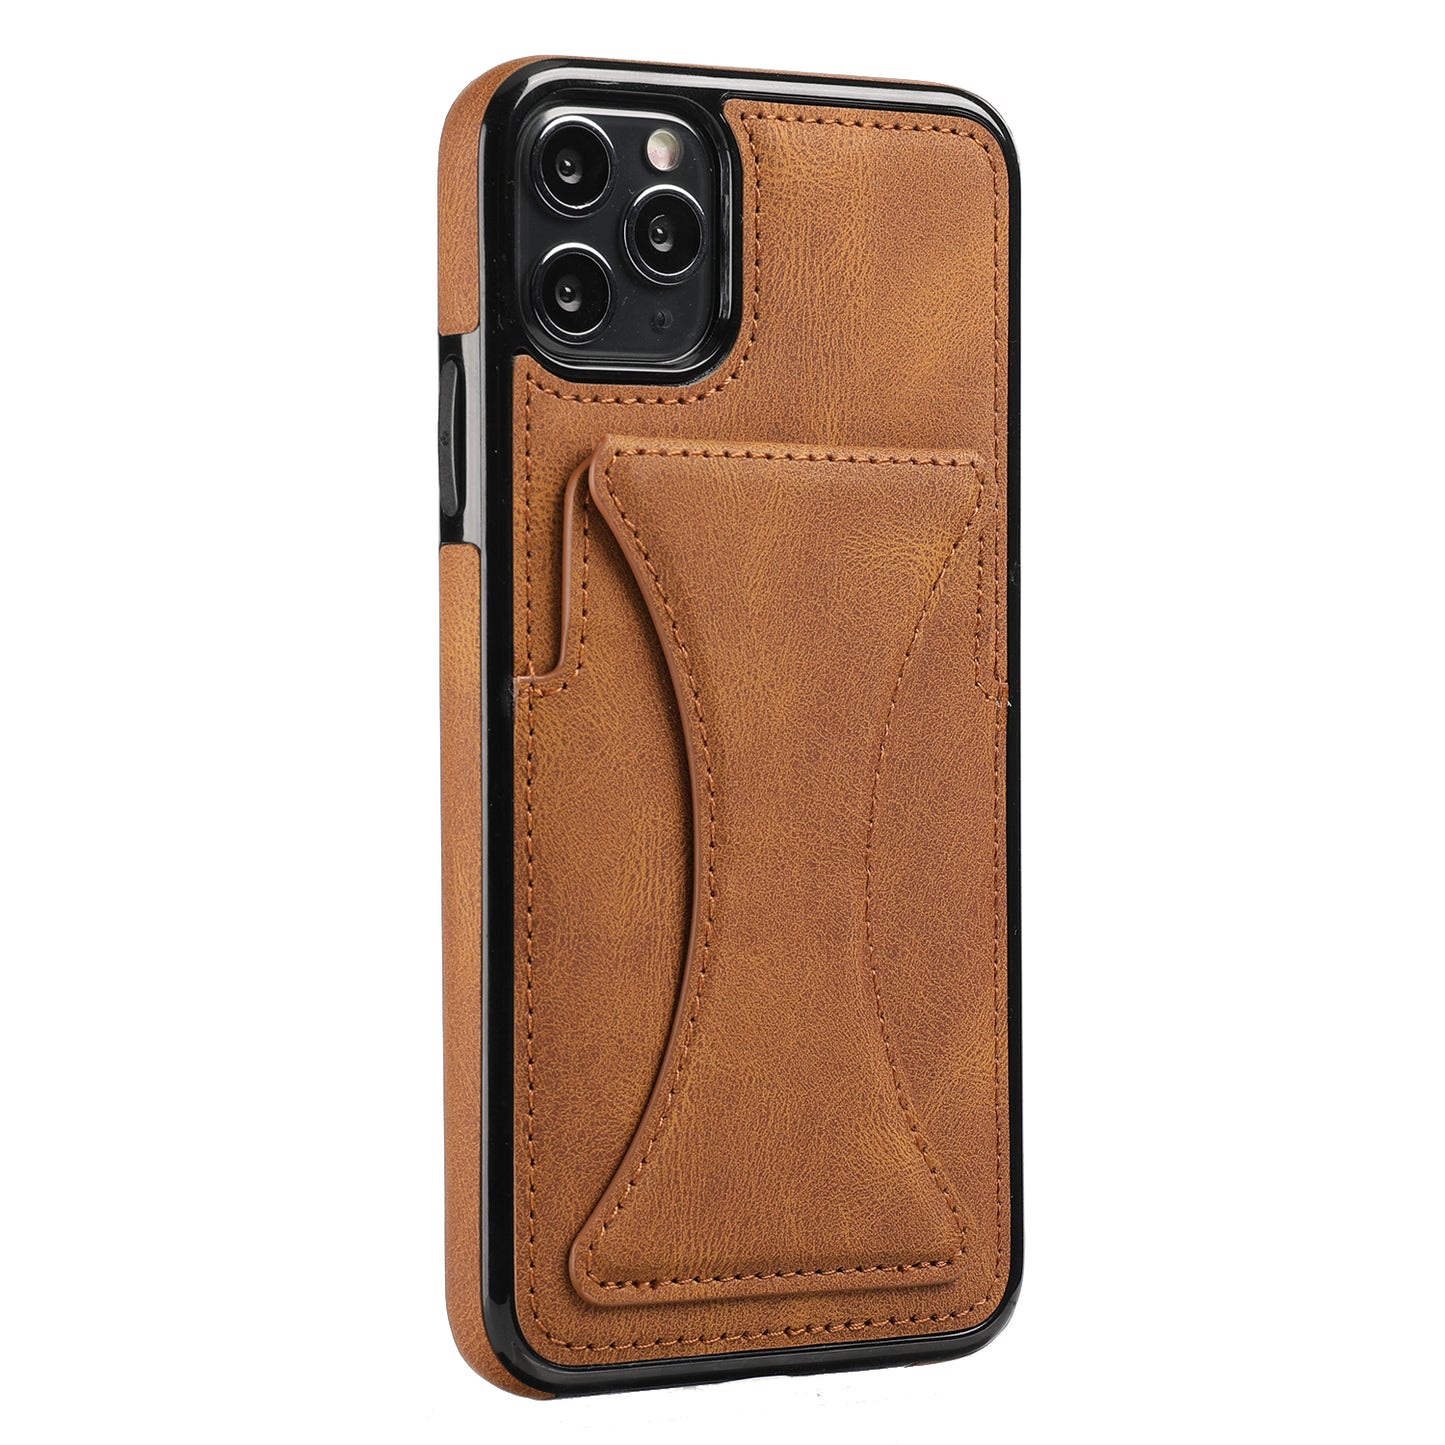 Mobile  Phone  Protective  Cover Solid Color Full Protector Anti-shock Anti-scratch Anti-slip Anti-fouling Phone Shell Compatible For Iphone 11 12 13 Series Brown_Iphone 11 pro max ZopiStyle